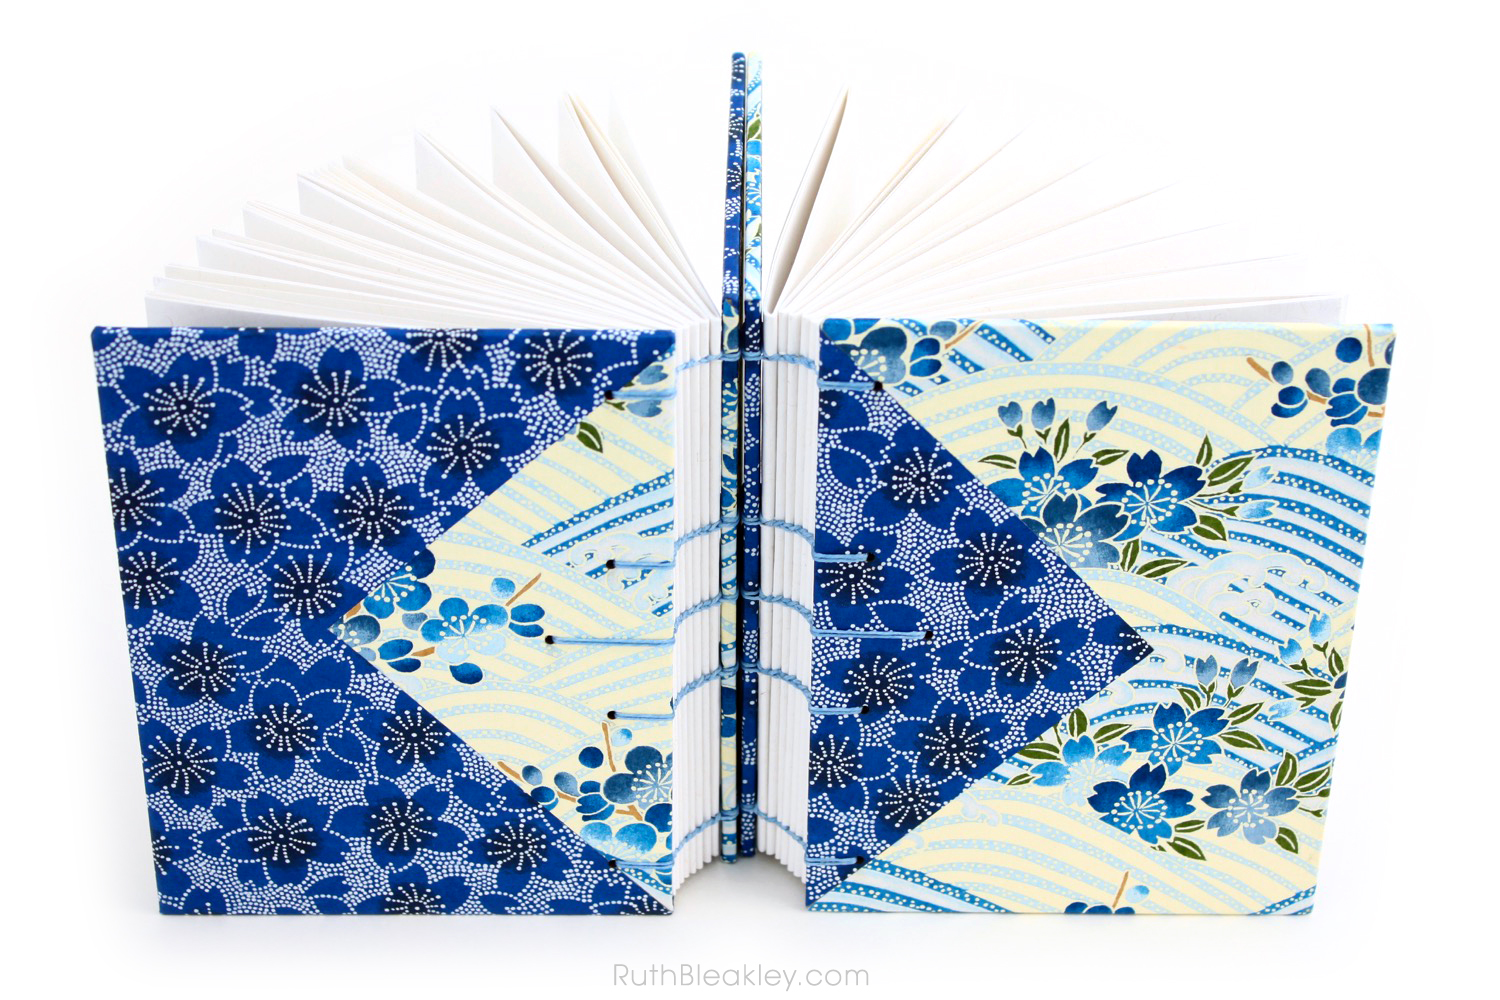 Blue flowers Twin Journals handmade by Ruth Bleakley Coptic Stitch with Japanese Yuzen Paper - 10